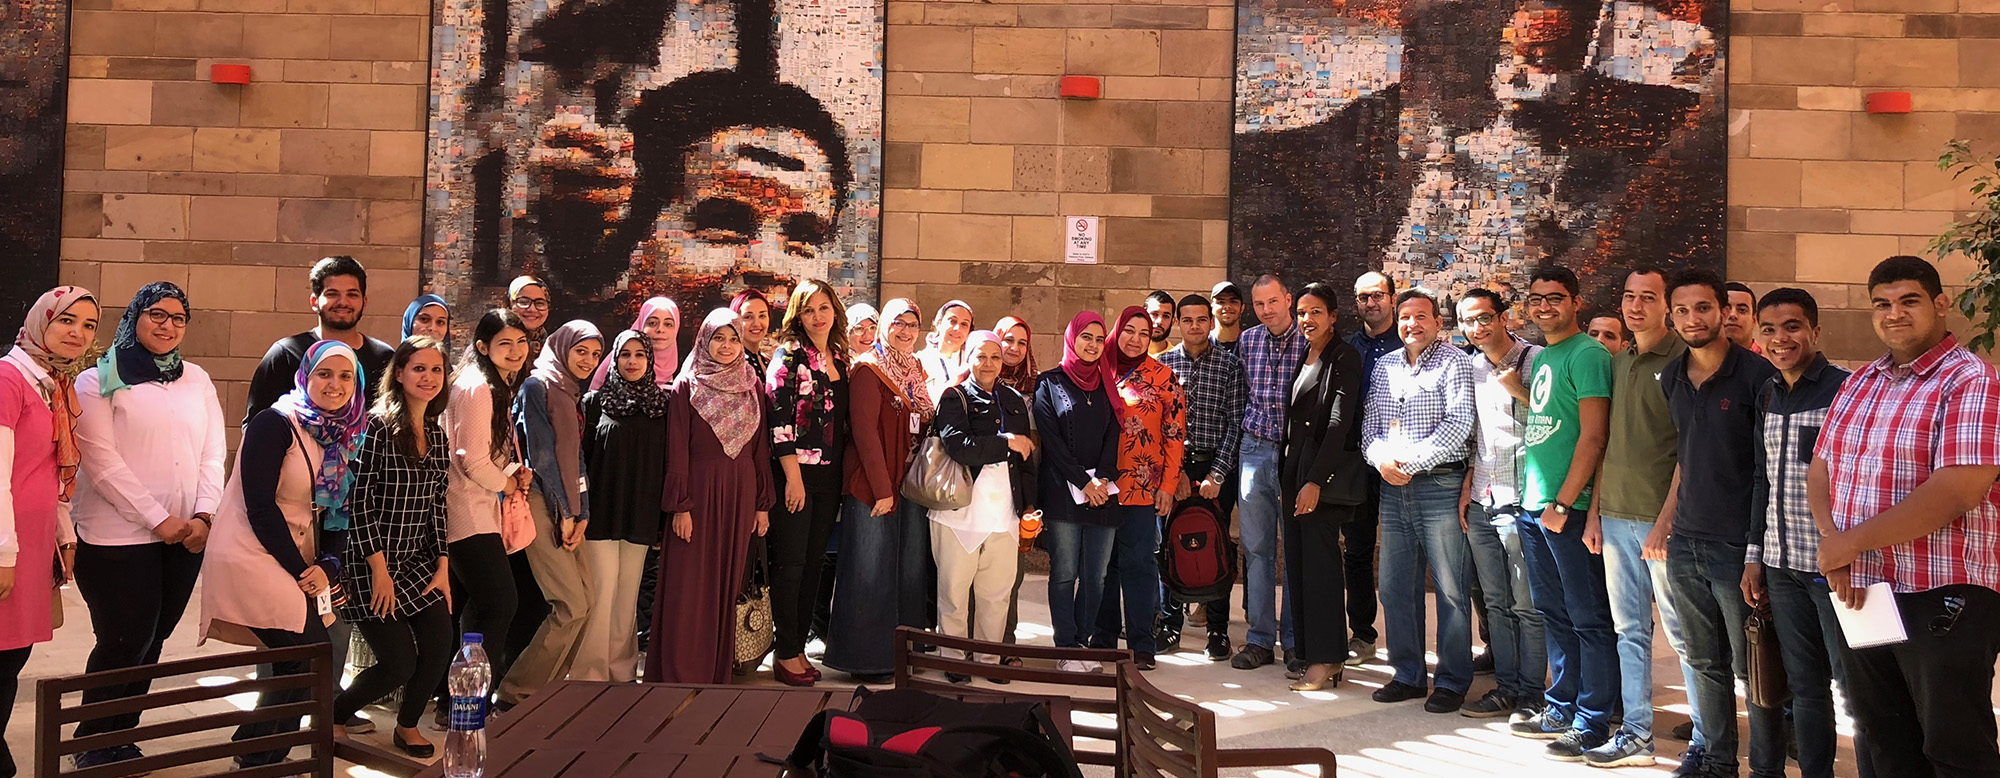 Dr. Karen Nelson and attendees of her lecture at the American University in Cairo.